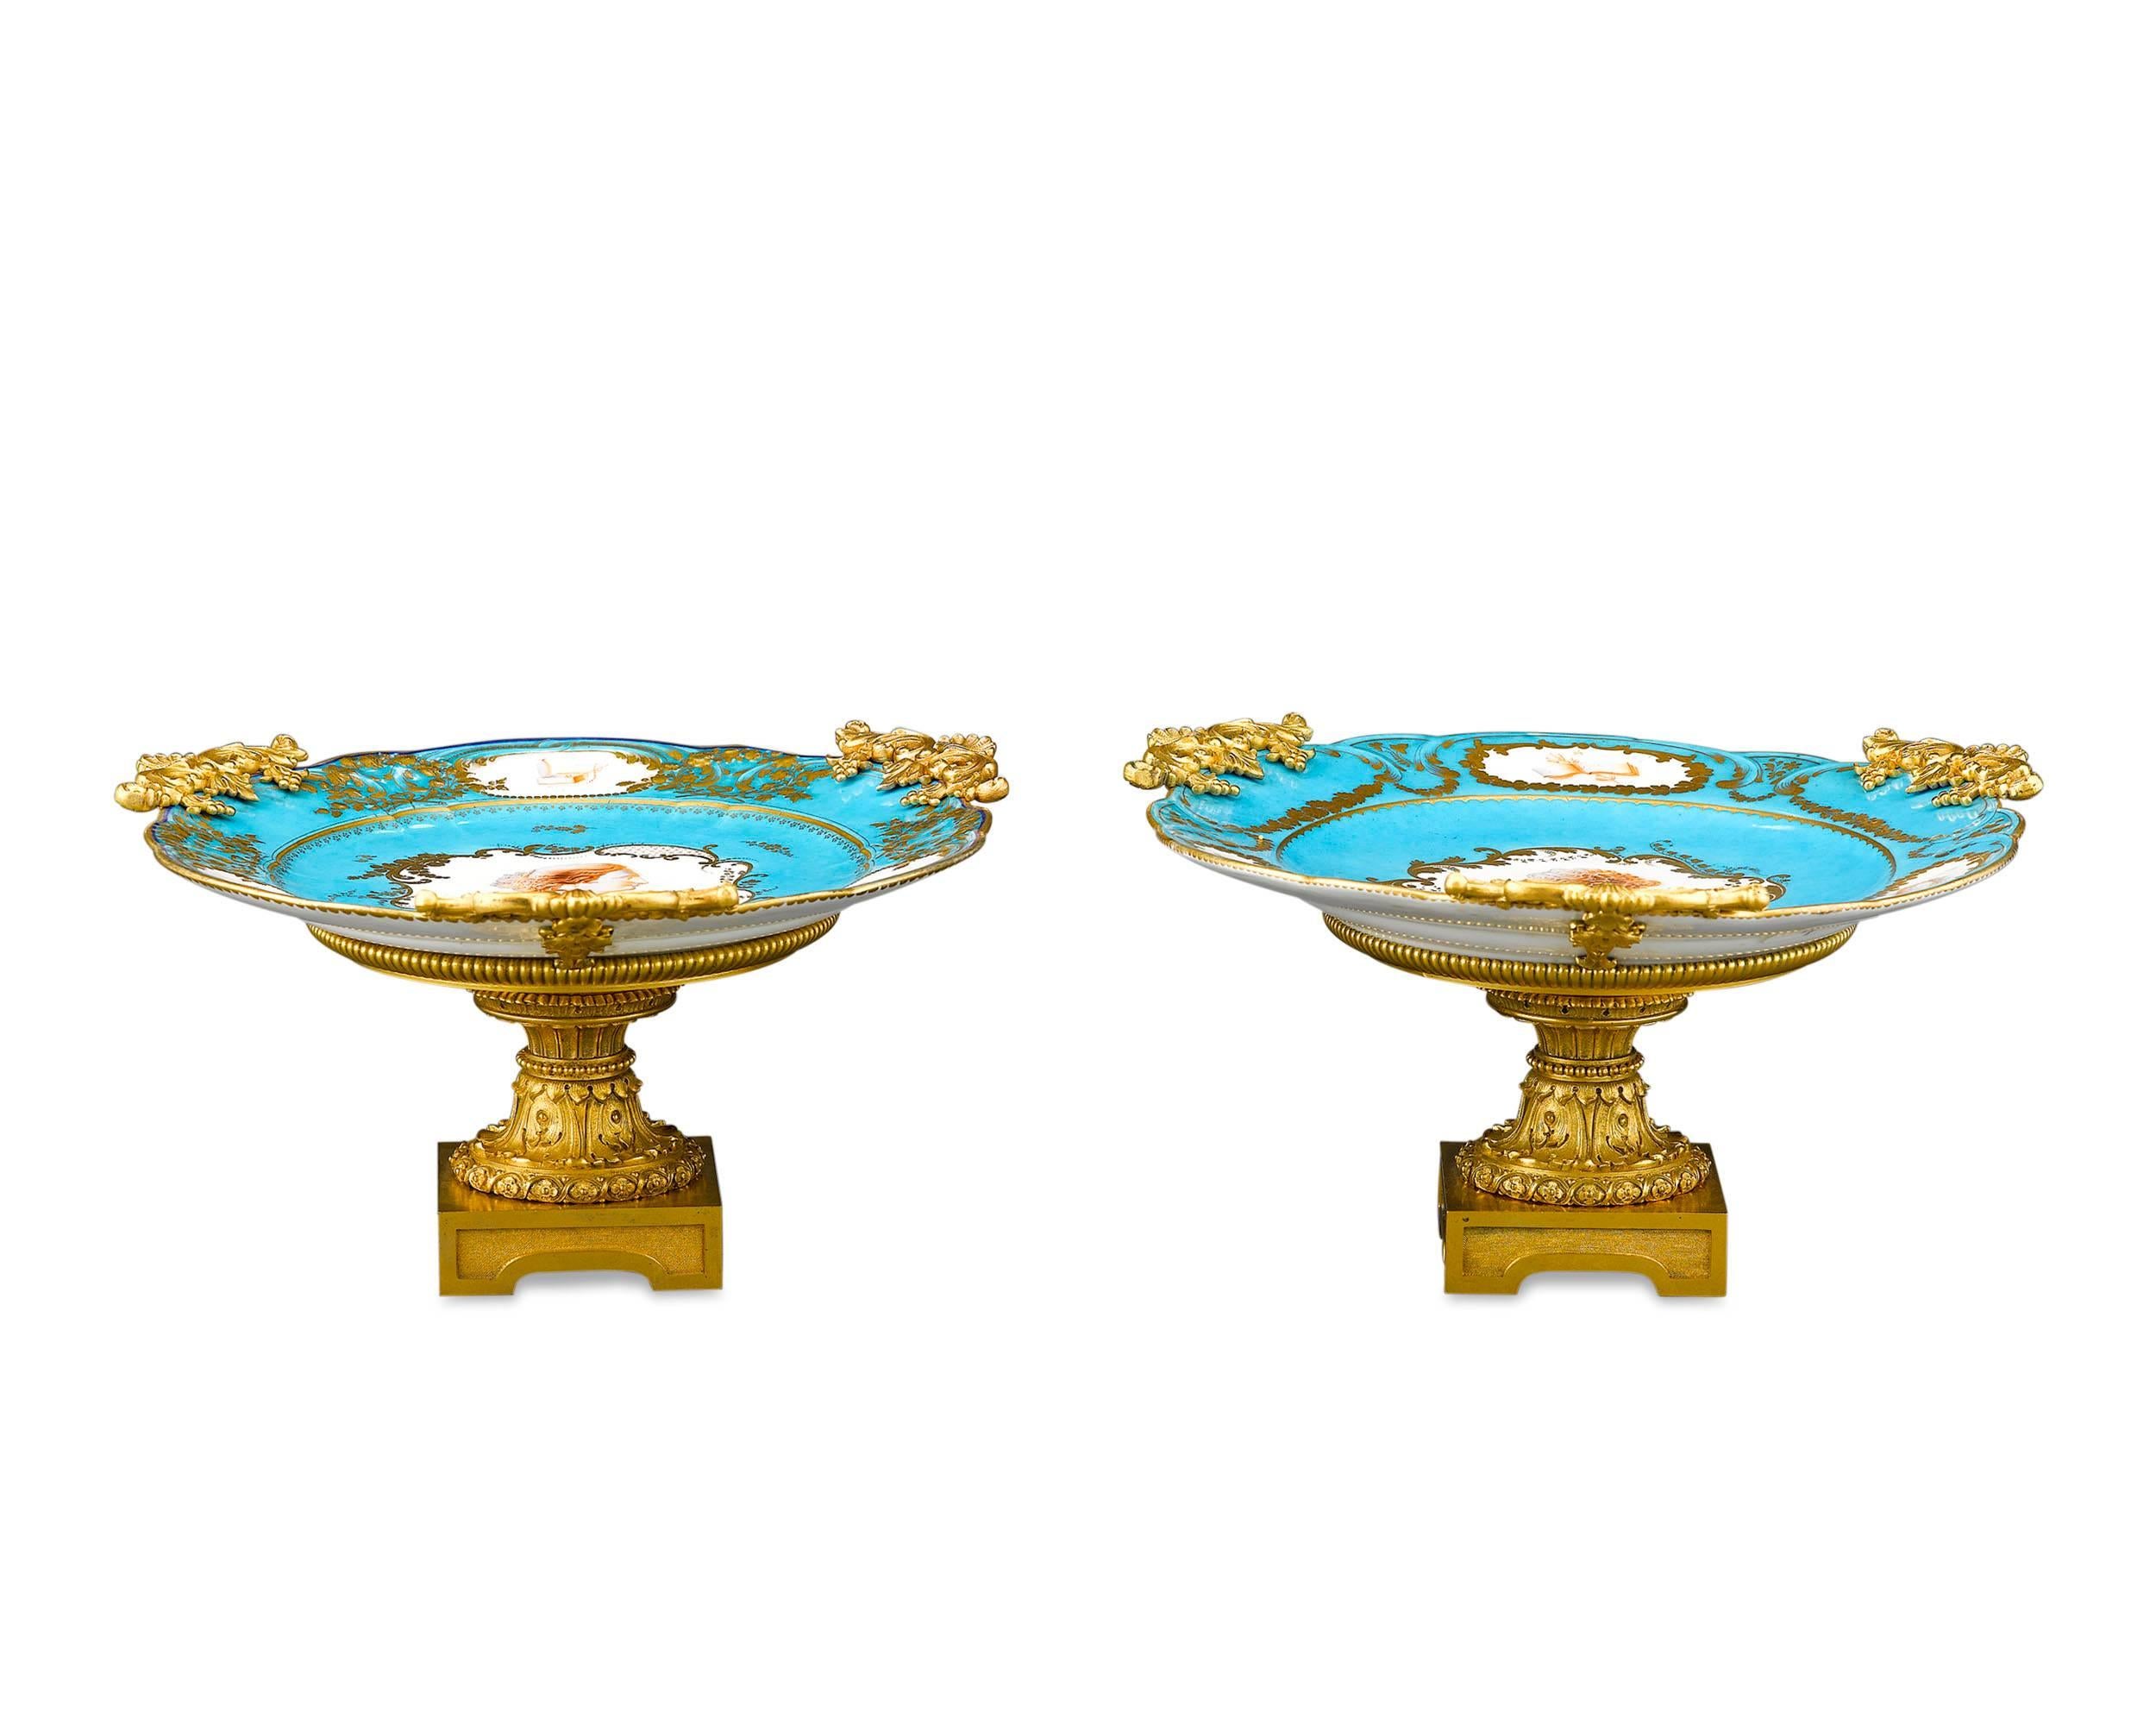 Two excellent Sèvres porcelain plates are mounted in bronze ormolu stands in these exceptional compotes. The delicate turquoise, or bleu celeste, hue provides the perfect background to exquisite portrait plaques of two ladies, surrounded by smaller